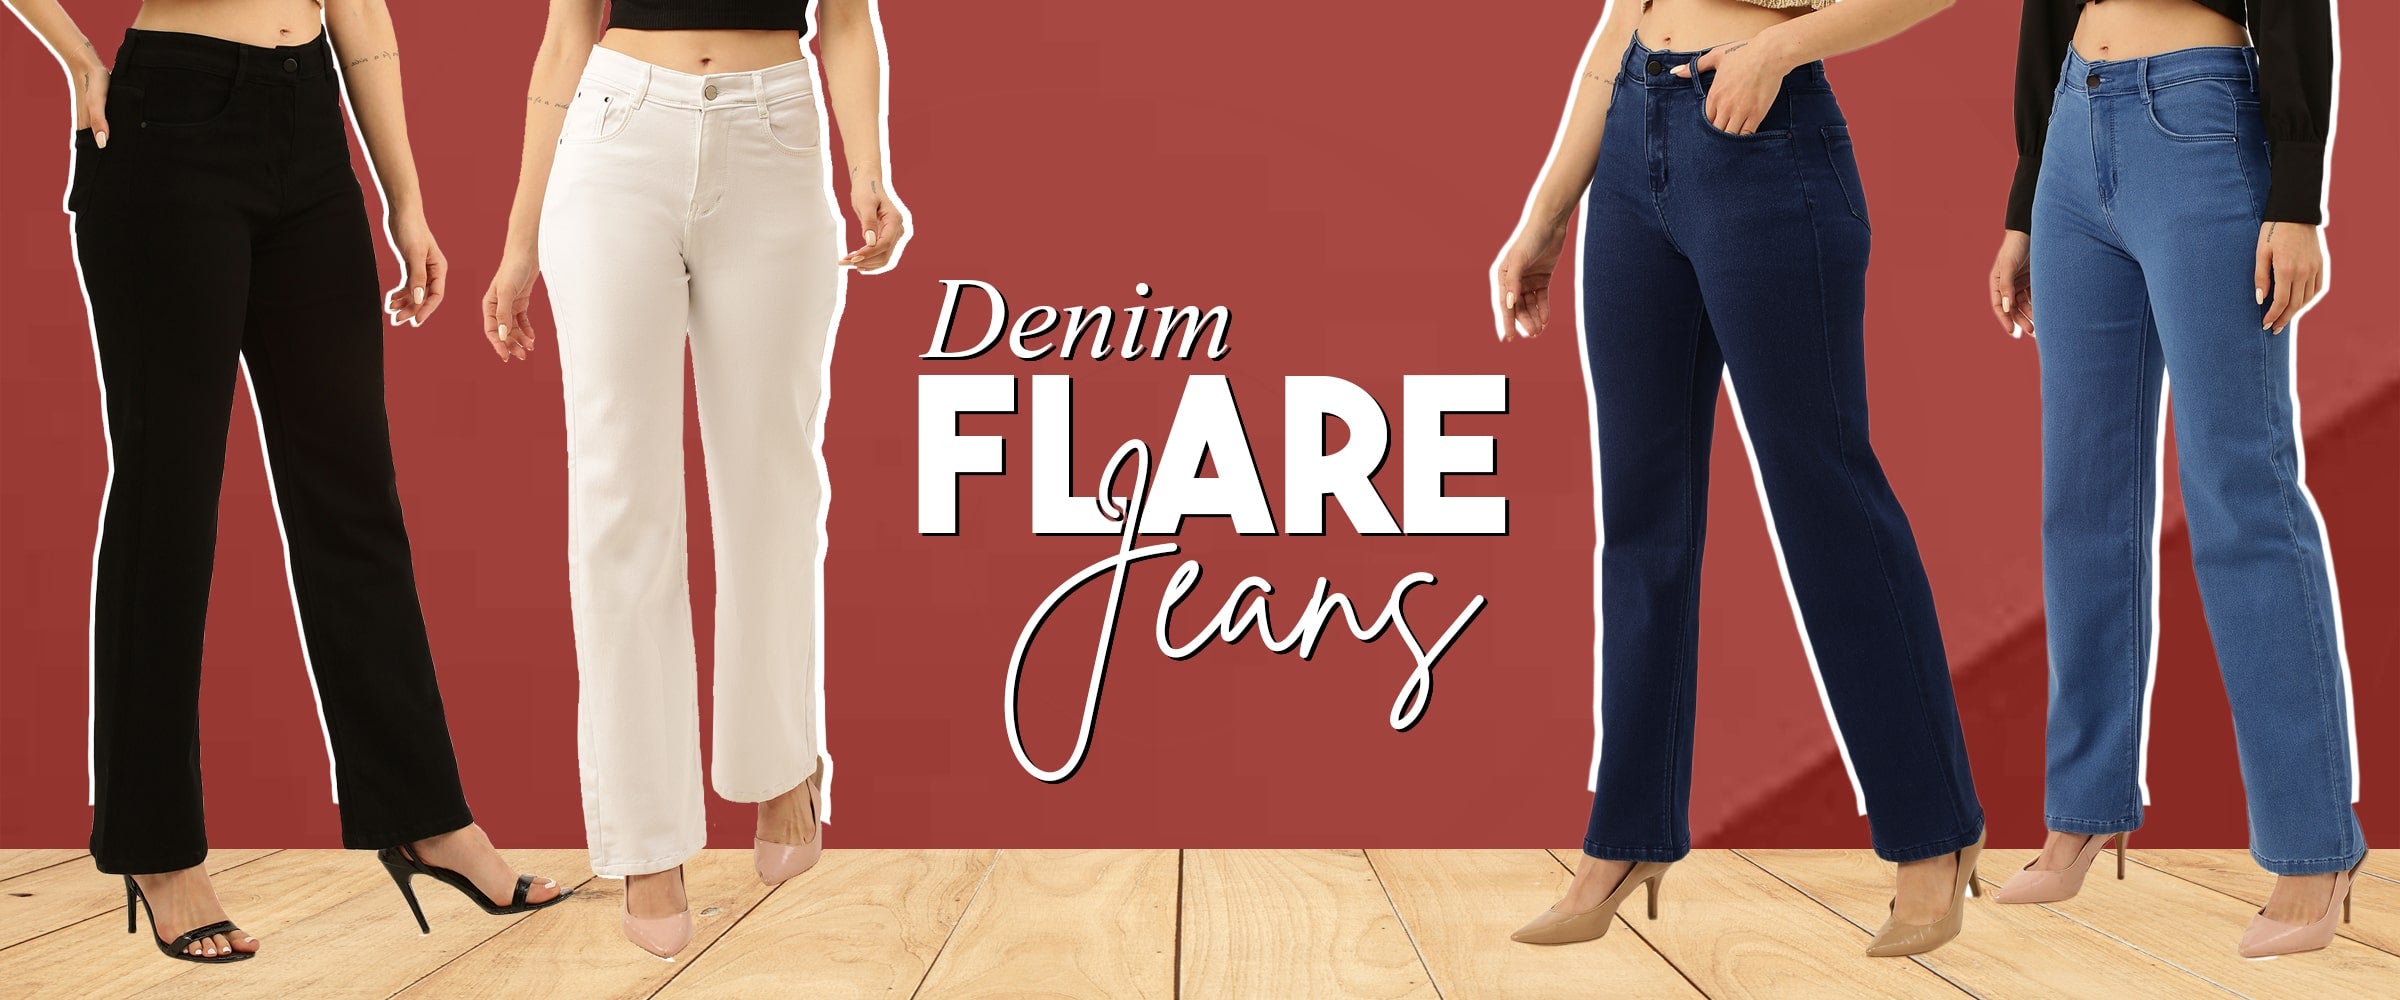 Flared Jeans, Bell Bottom Jeans